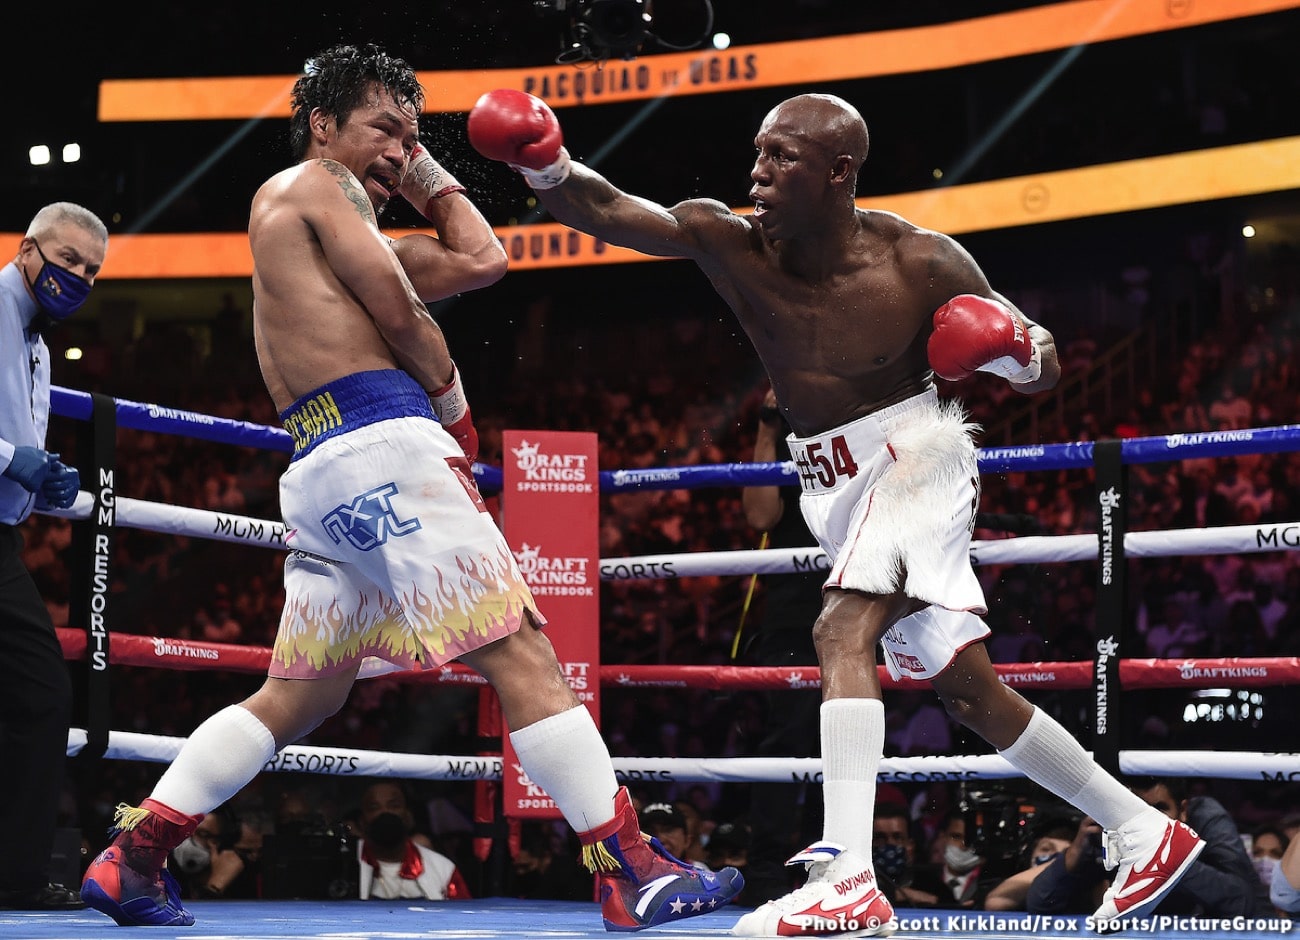 Image: Mayweather Promotions CEO reacts to Pacquiao loss to Ugas